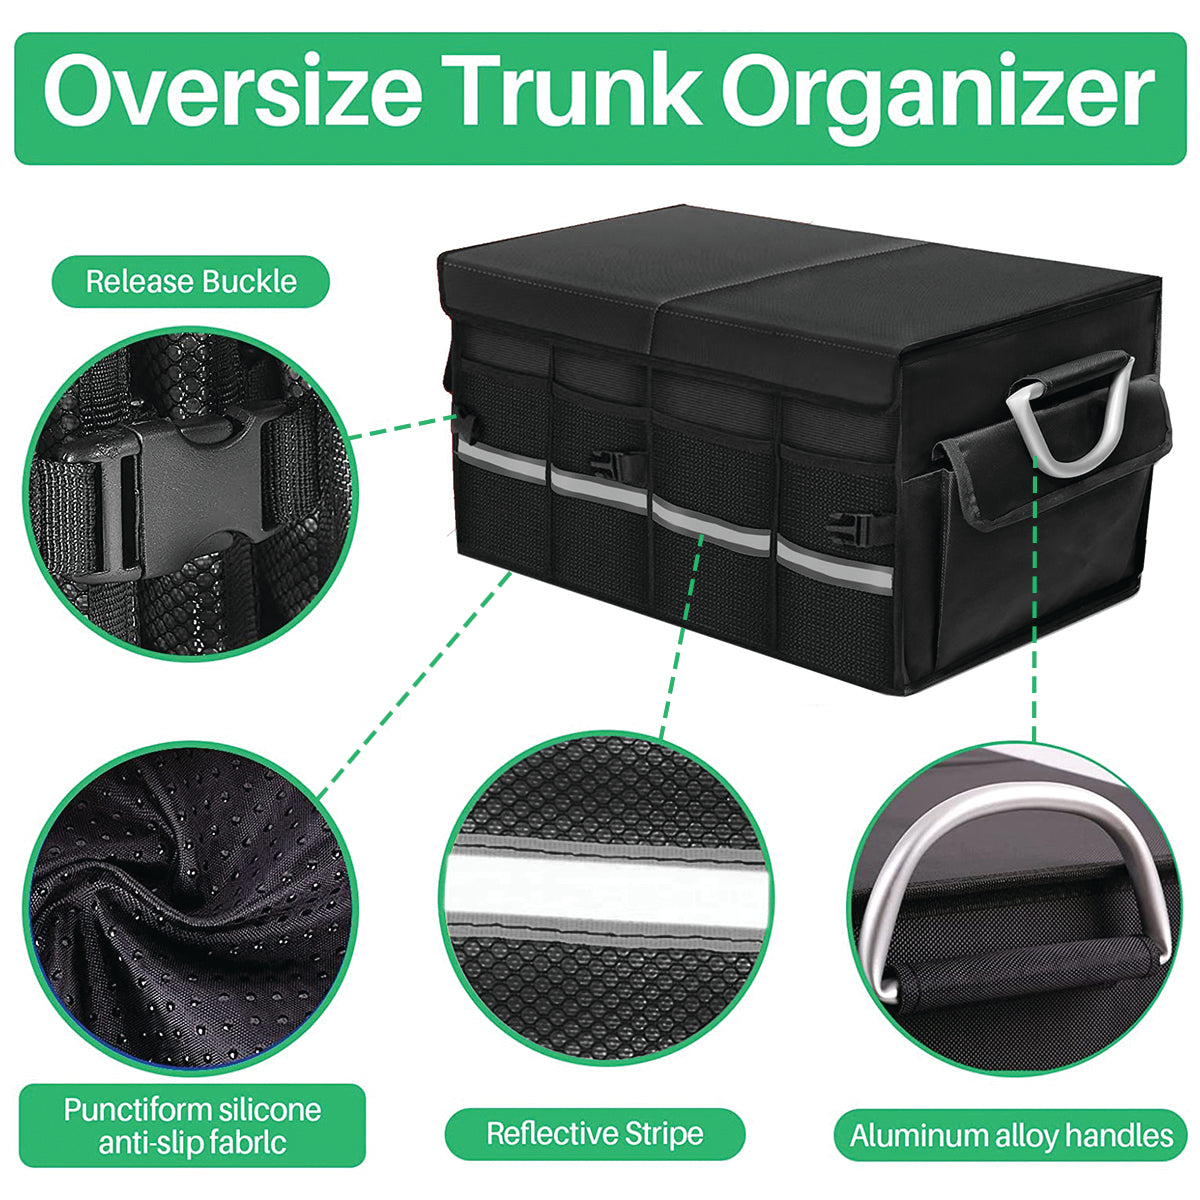 Big Trunk Organizer, Custom-Fit For Car, Cargo Organizer SUV Trunk Storage Waterproof Collapsible Durable Multi Compartments DLPF253